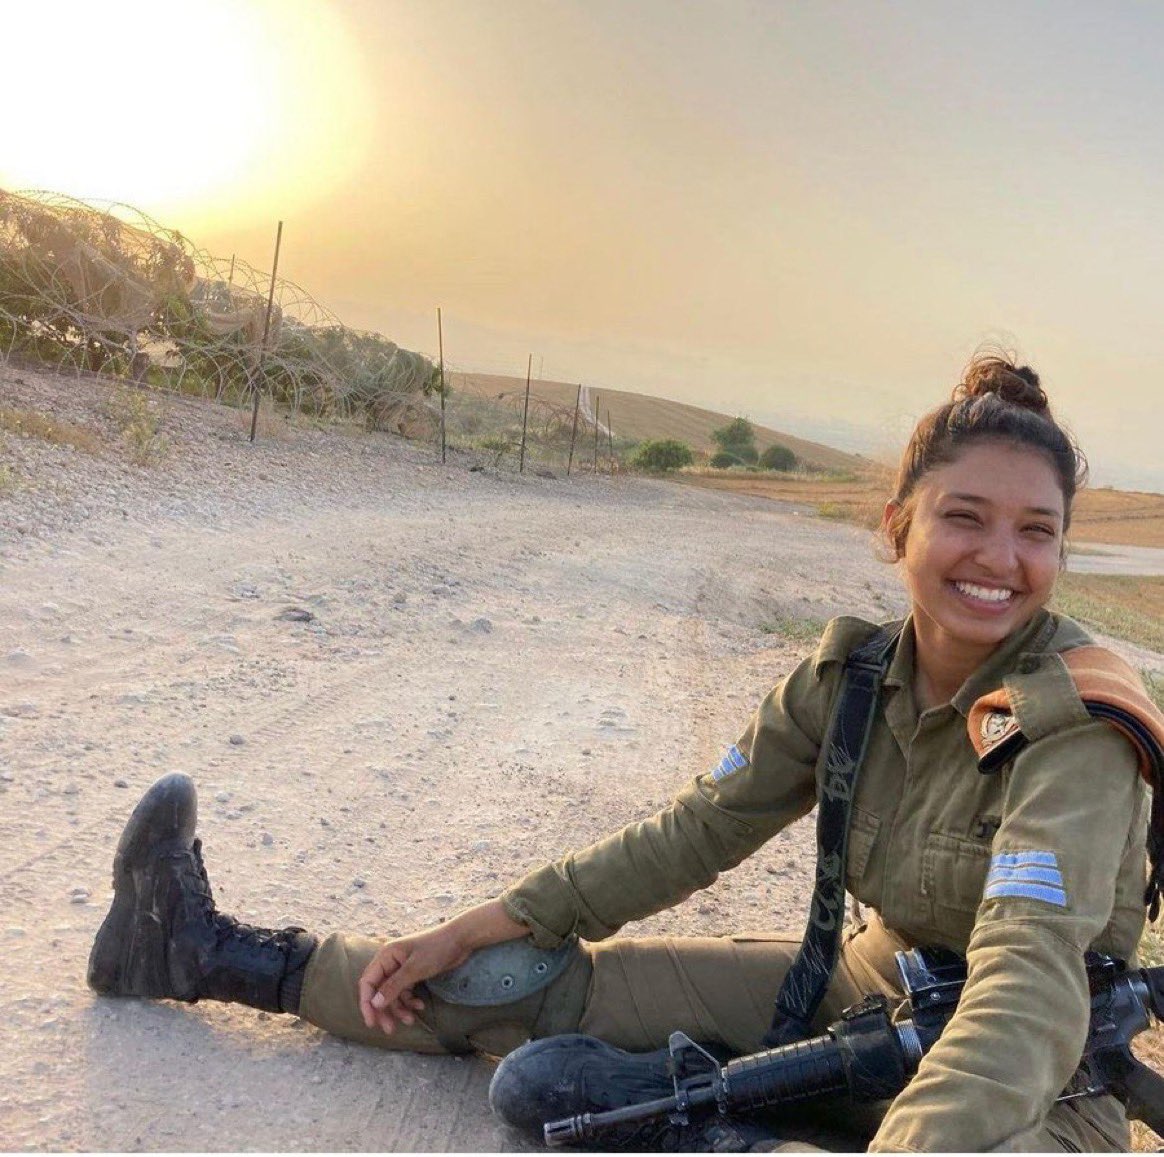 Or Moses z'l, 22, was a commander in the Extraction and Rescue Unit. On October 7, when she realized that terrorists had infiltrated her army base Zikim, Or and 13 other soldiers told 90 recruits (young soldiers) and staff to hide in the shelter and went out to fight the